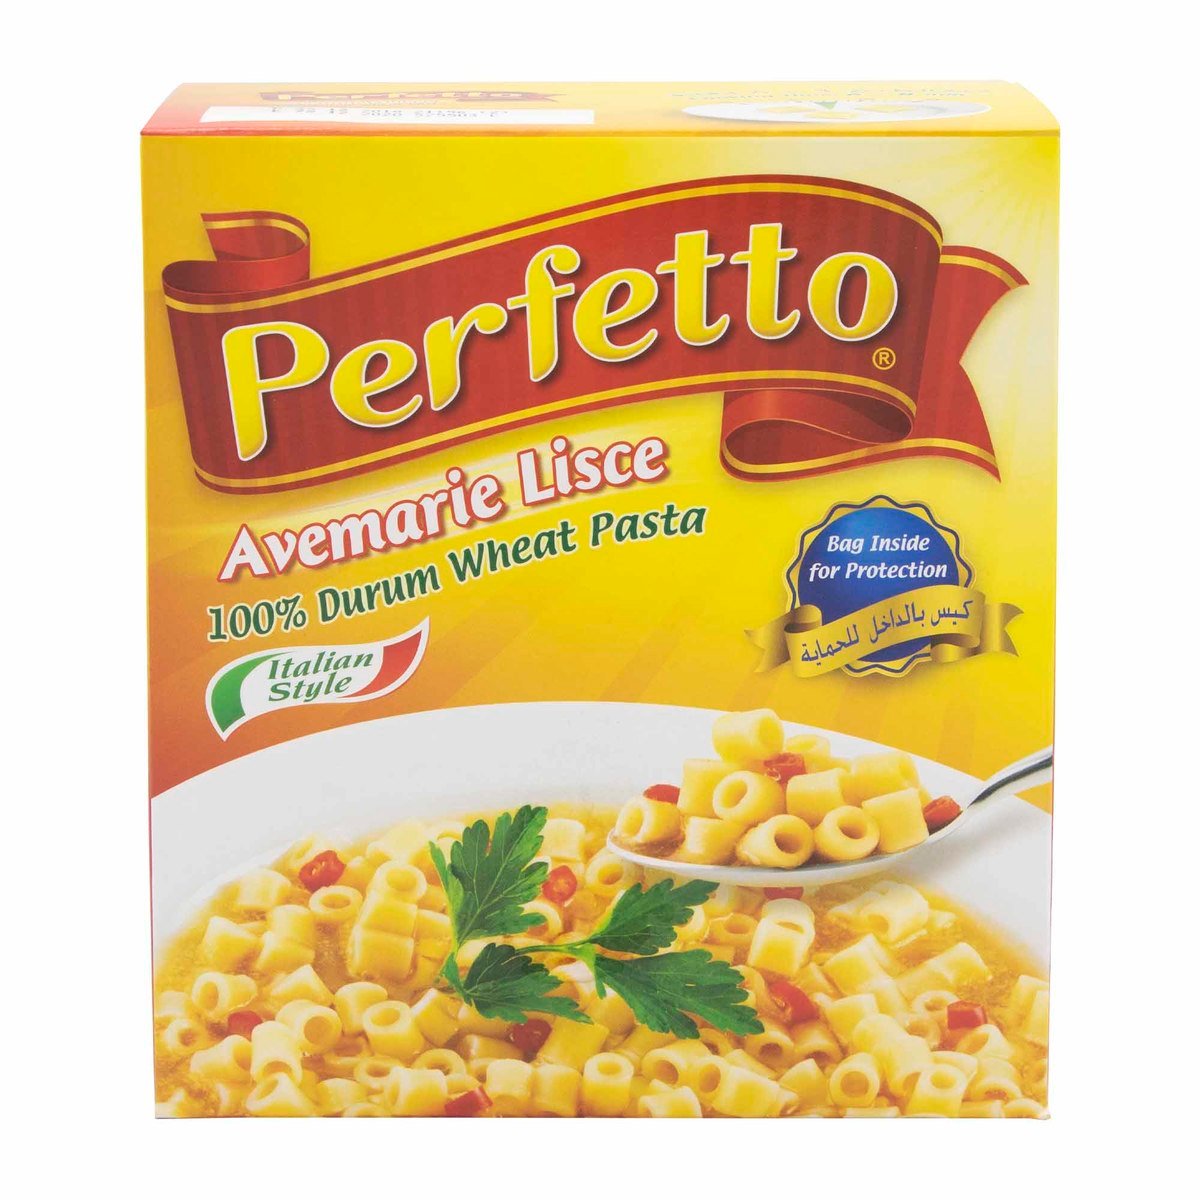 Perfetto Avemarie Lisce 500g